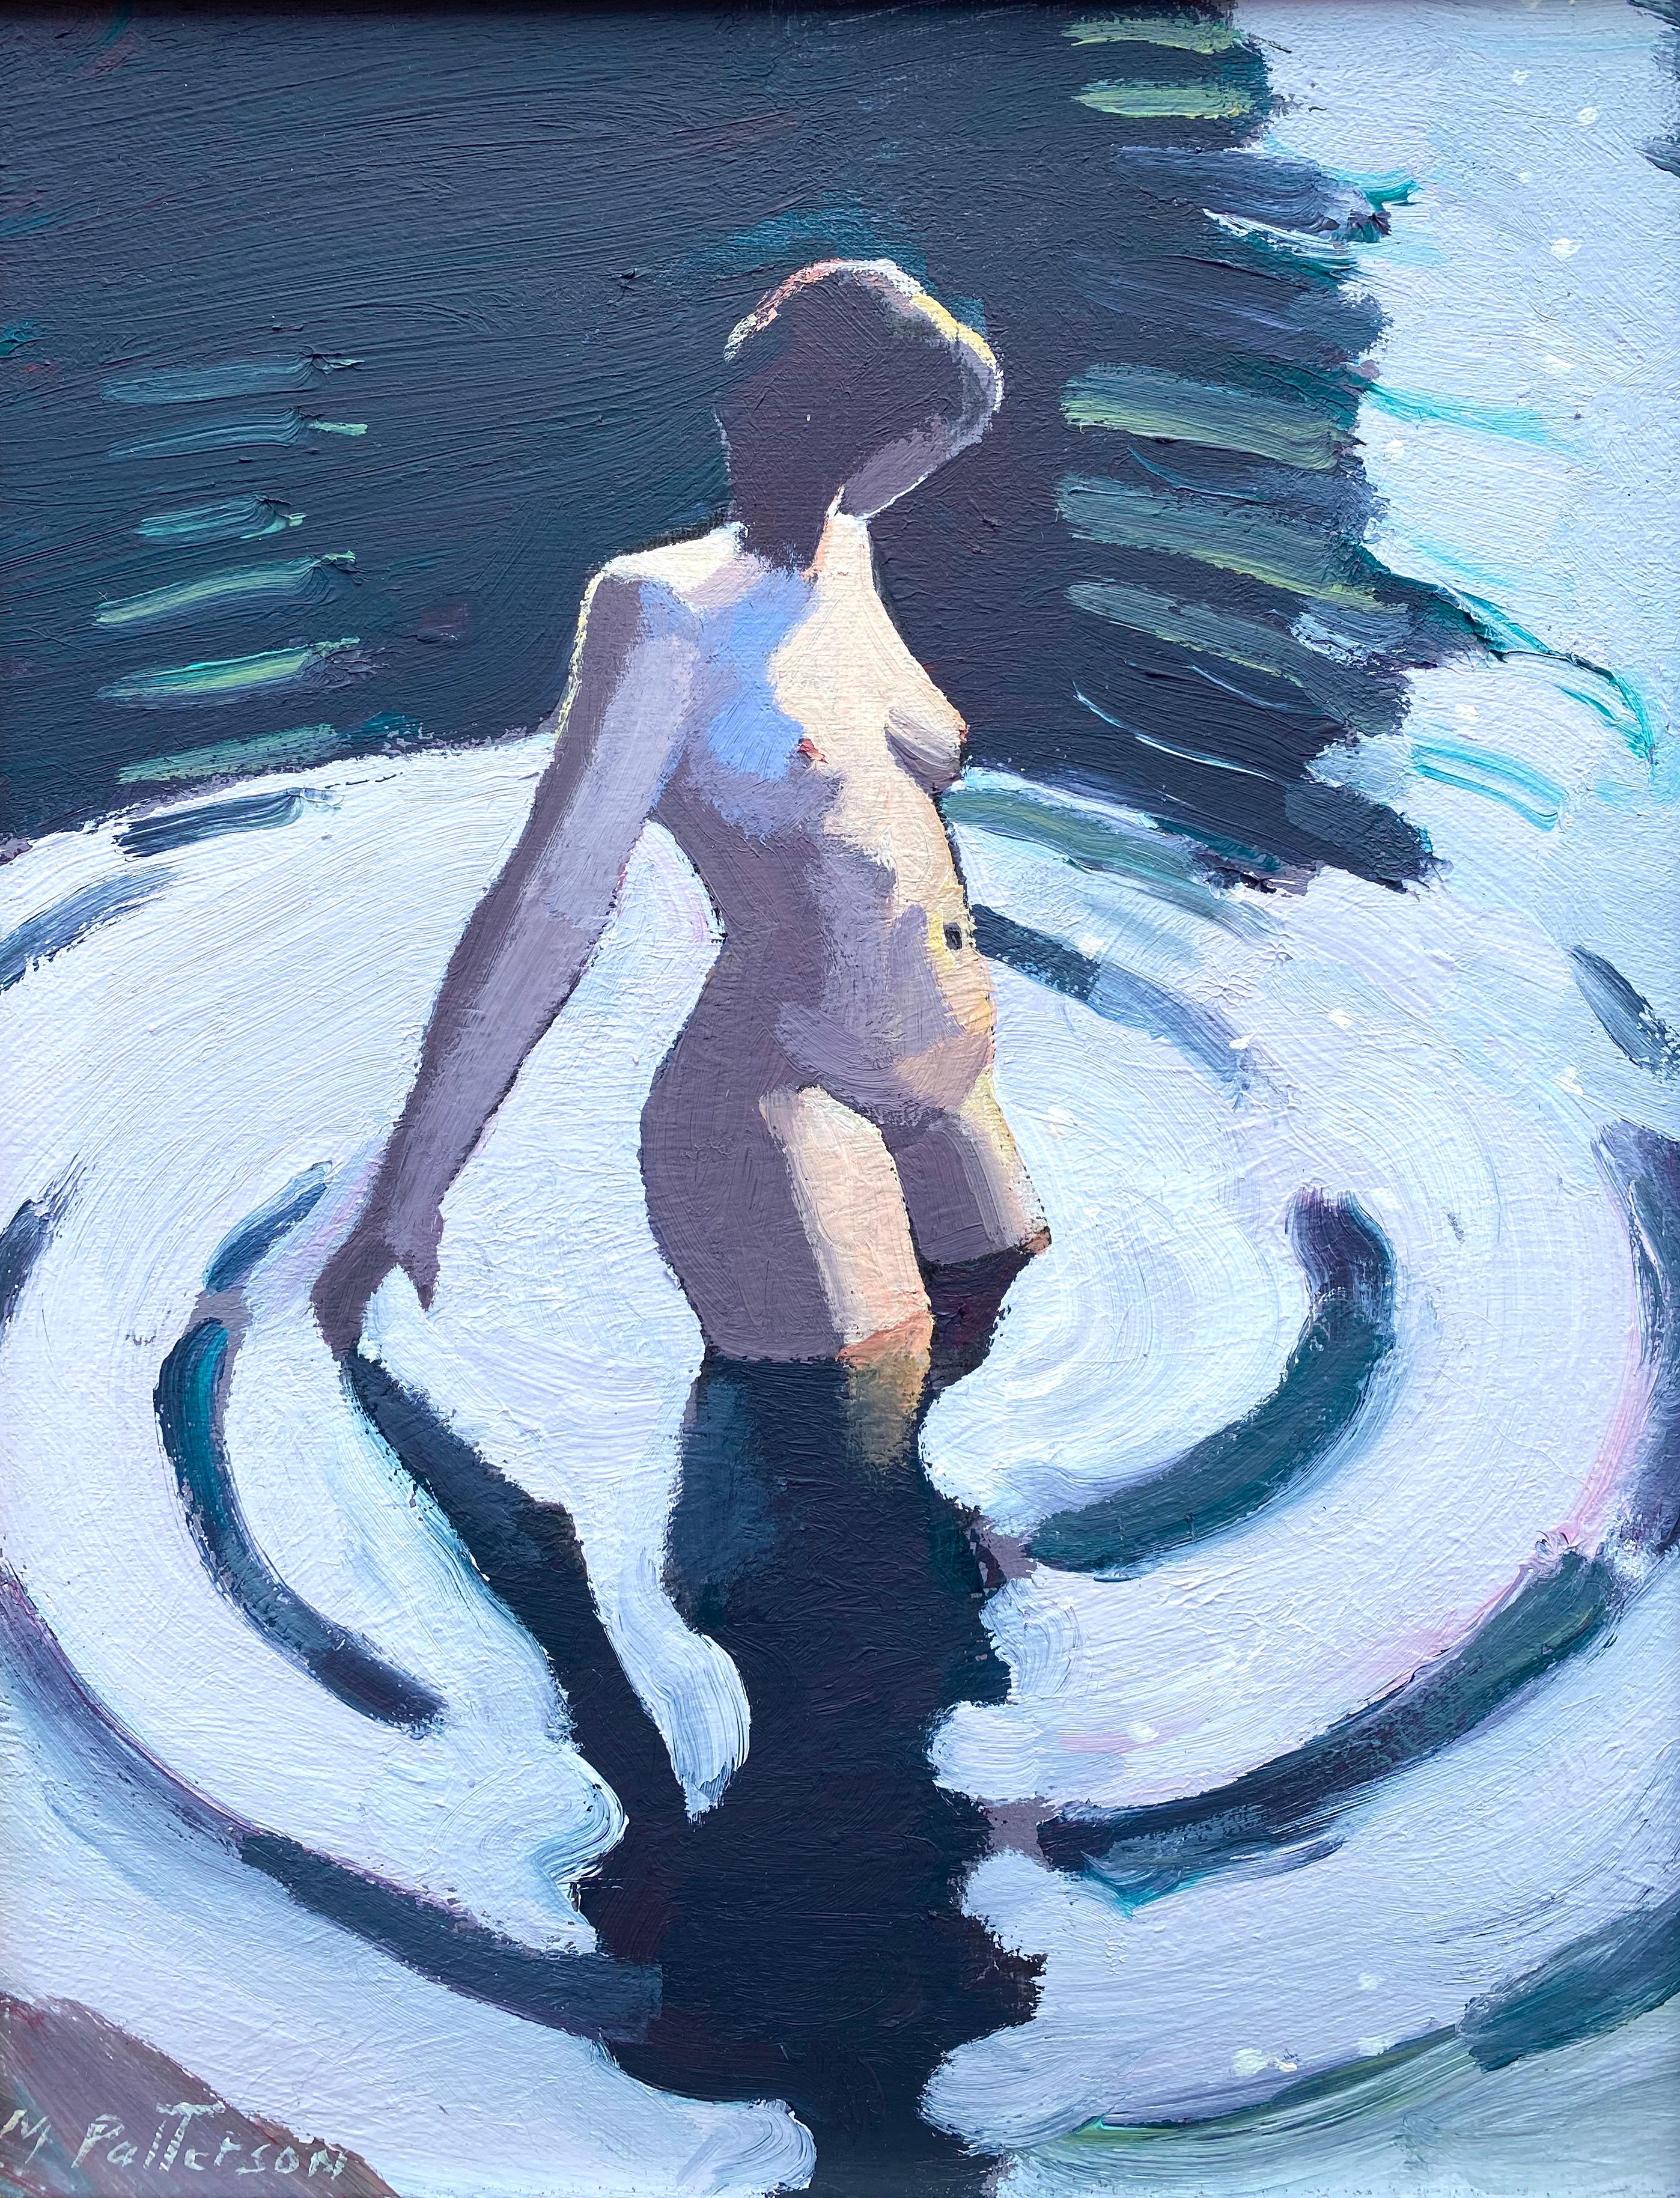 Michael Patterson Figurative Painting - “The Bather”